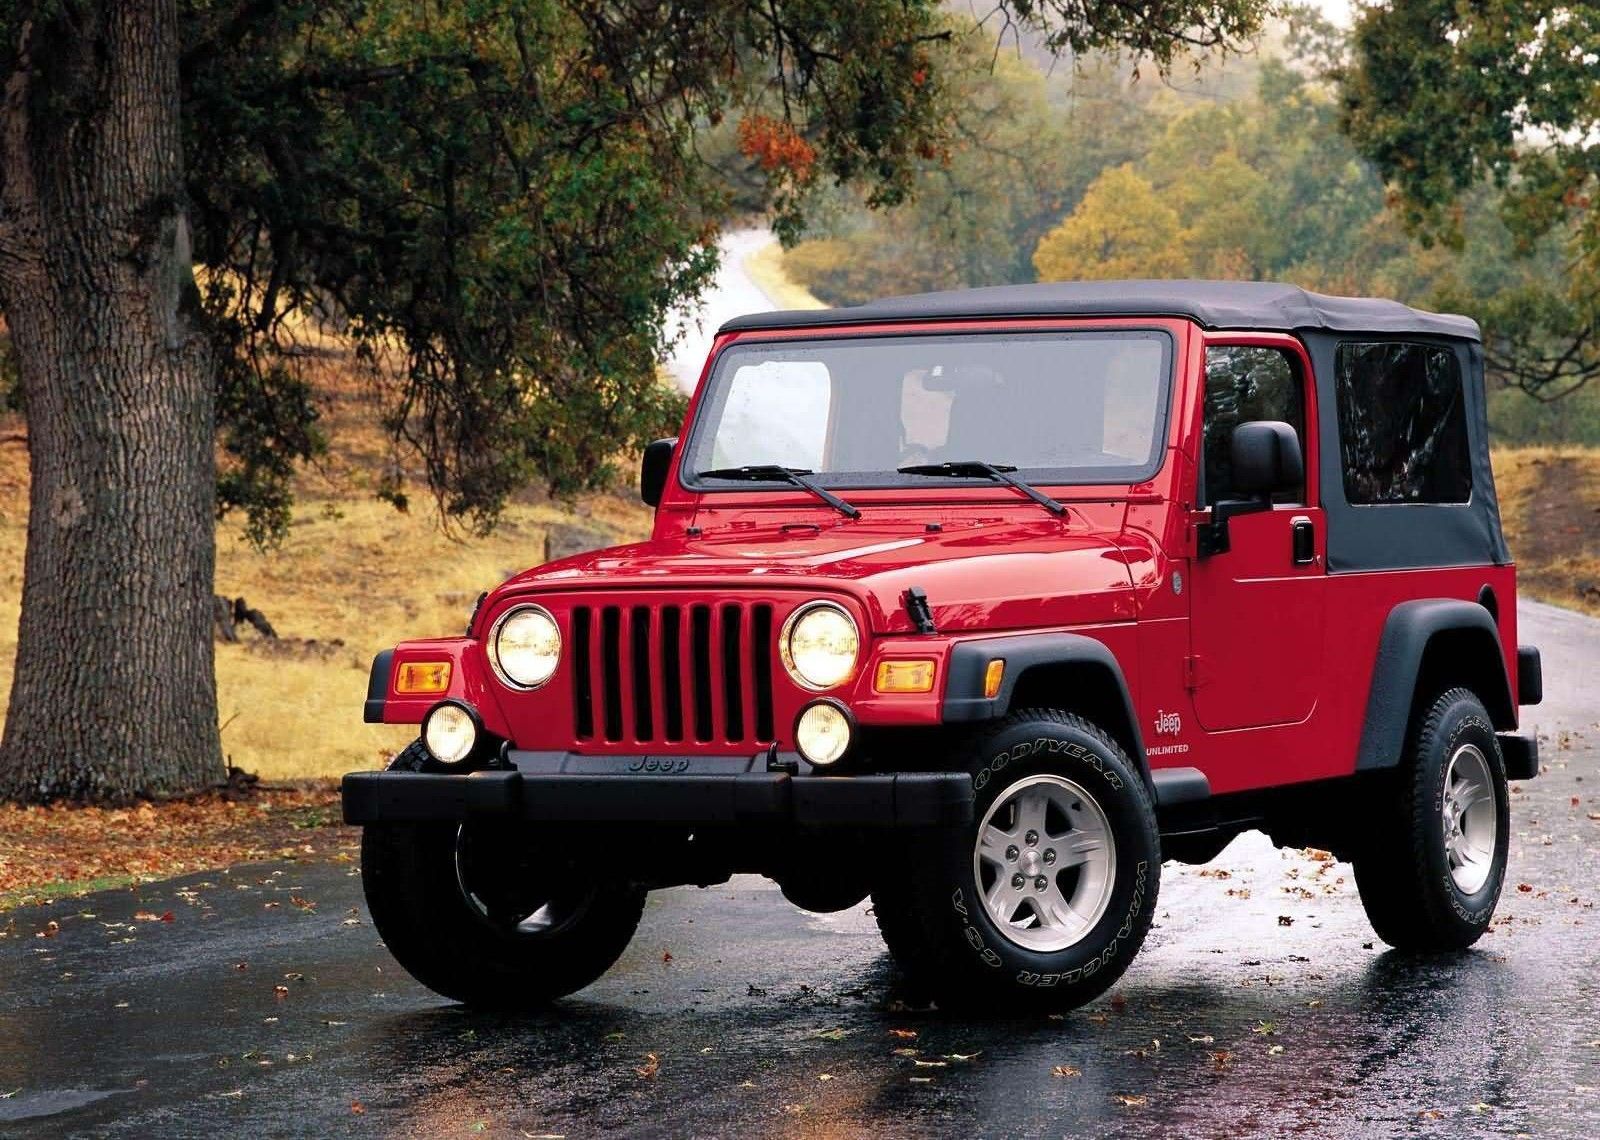 The 2004 Jeep Wrangler on the street.